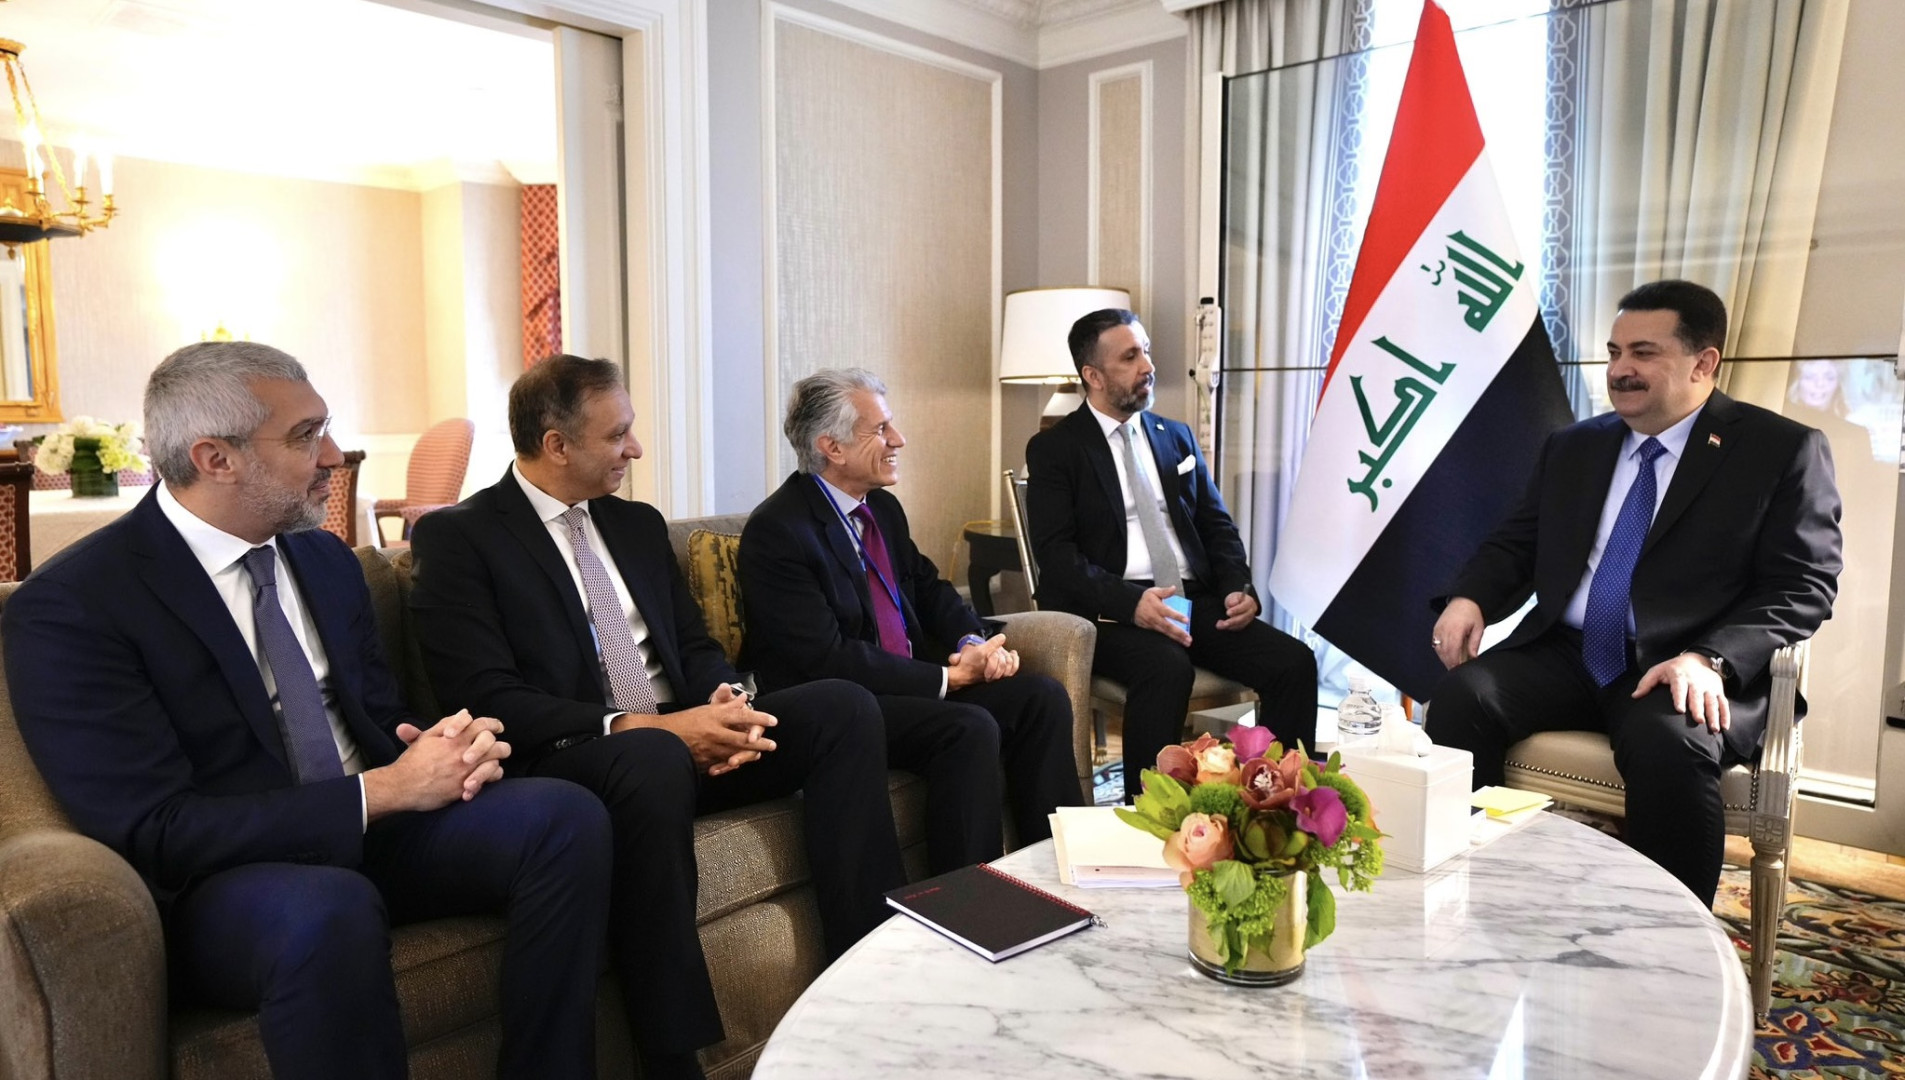 Iraqi PM discusses banking reforms with JP Morgans global head in Washington meeting